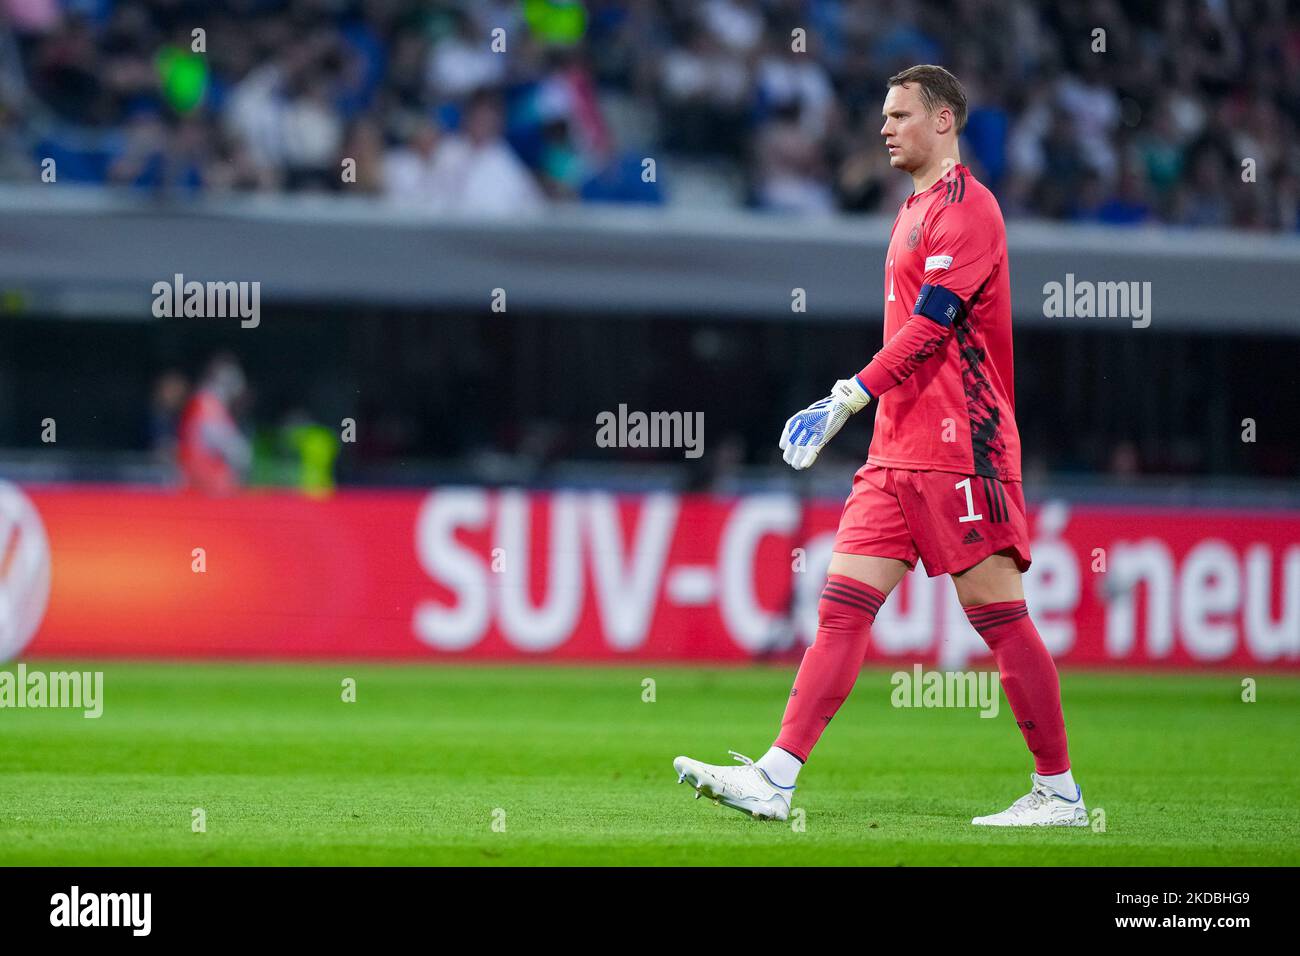 Manuel Neuer of Germany looks on during the UEFA Nations League match between Italy and Germany at Stadio Renato Dall'Ara, Bologna, Italy on 4 June 2022. (Photo by Giuseppe Maffia/NurPhoto) Stock Photo